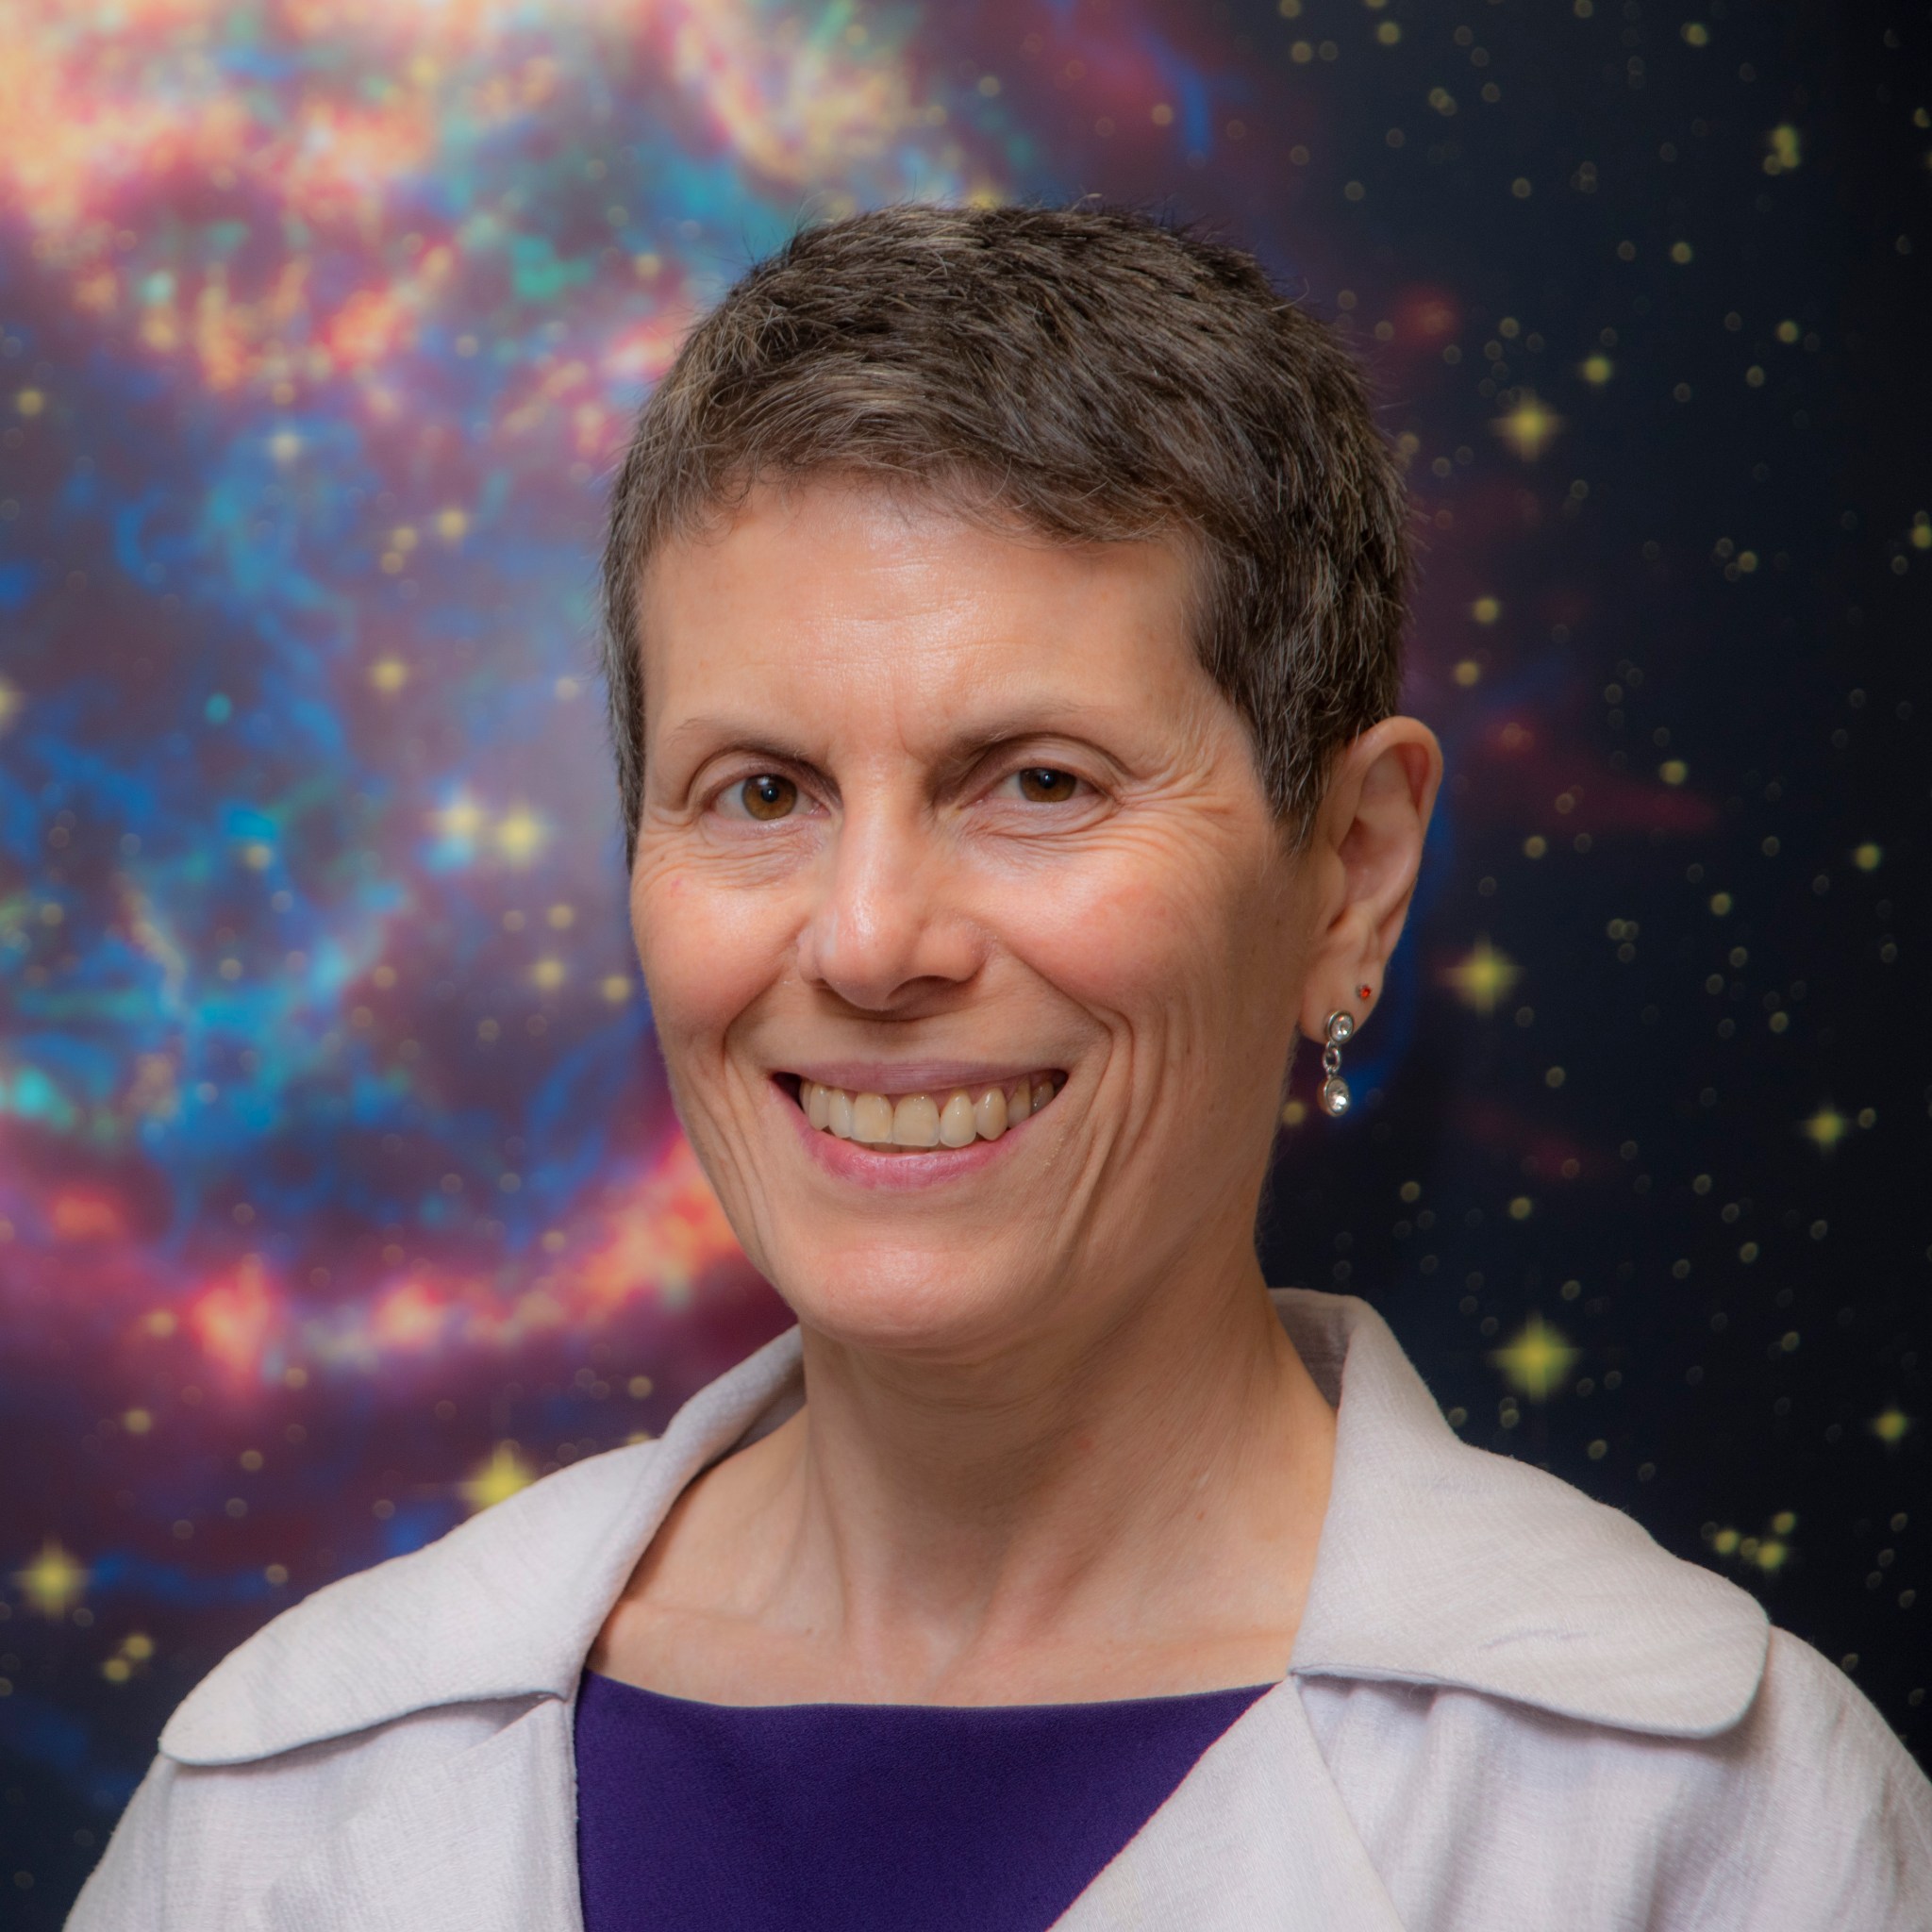 Portrait photo of Dr. Rita Sambruna smiling with a light colored jacket over a purple shirt. Behind her is a galaxy portrait.